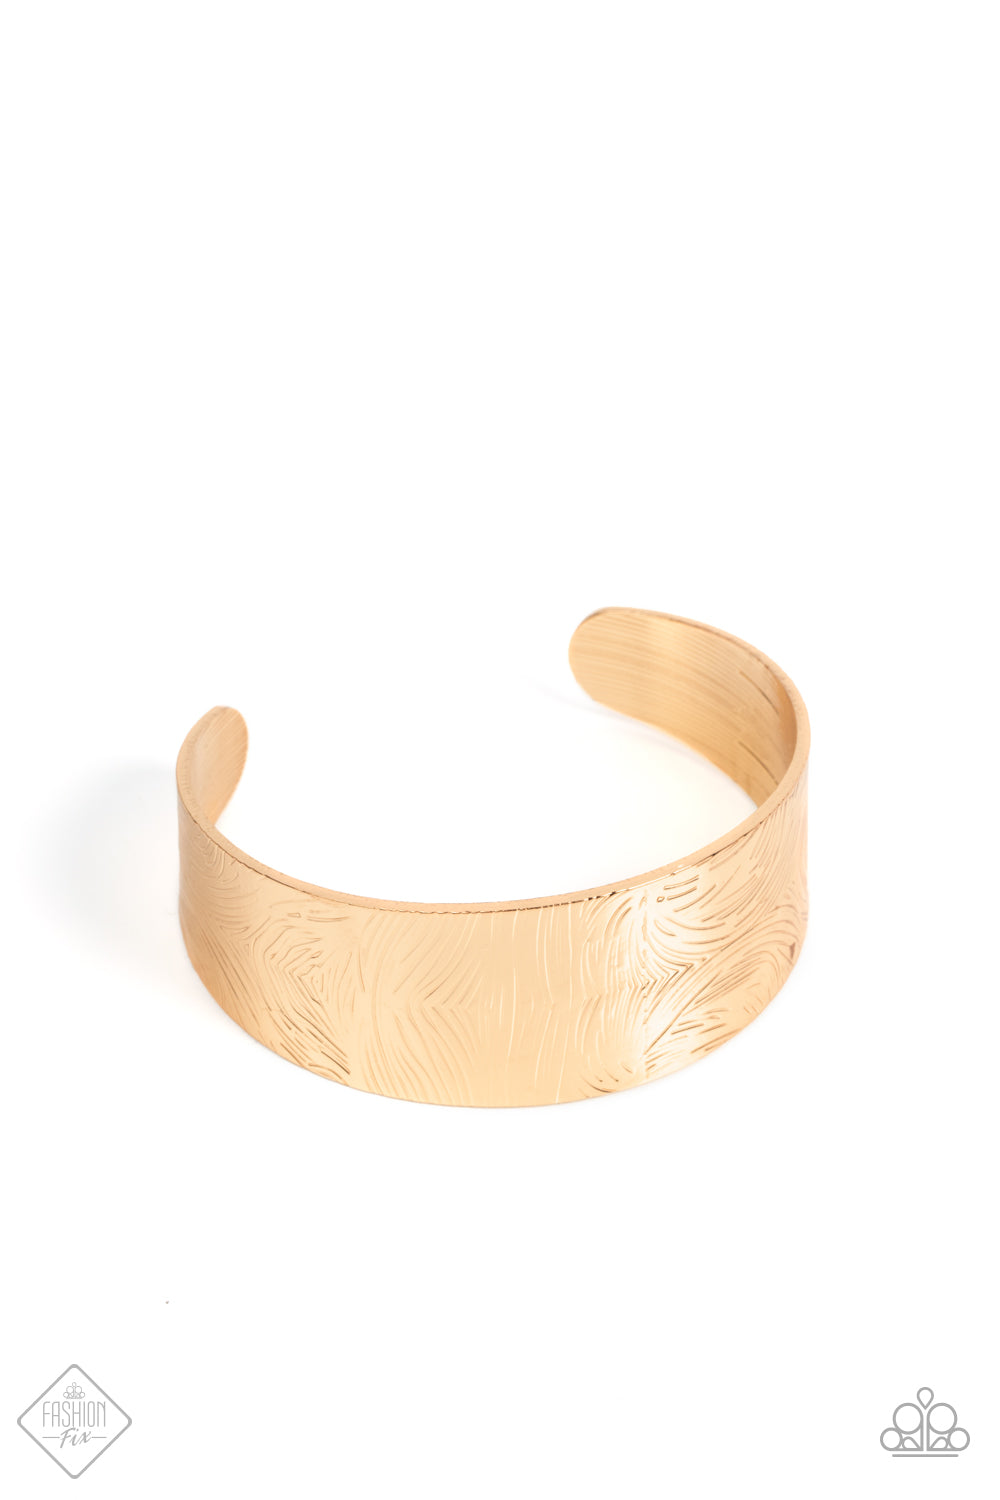 Paparazzi Cooly Curved Gold Cuff Bracelet - Fashion Fix Sunset Sightings September 2021